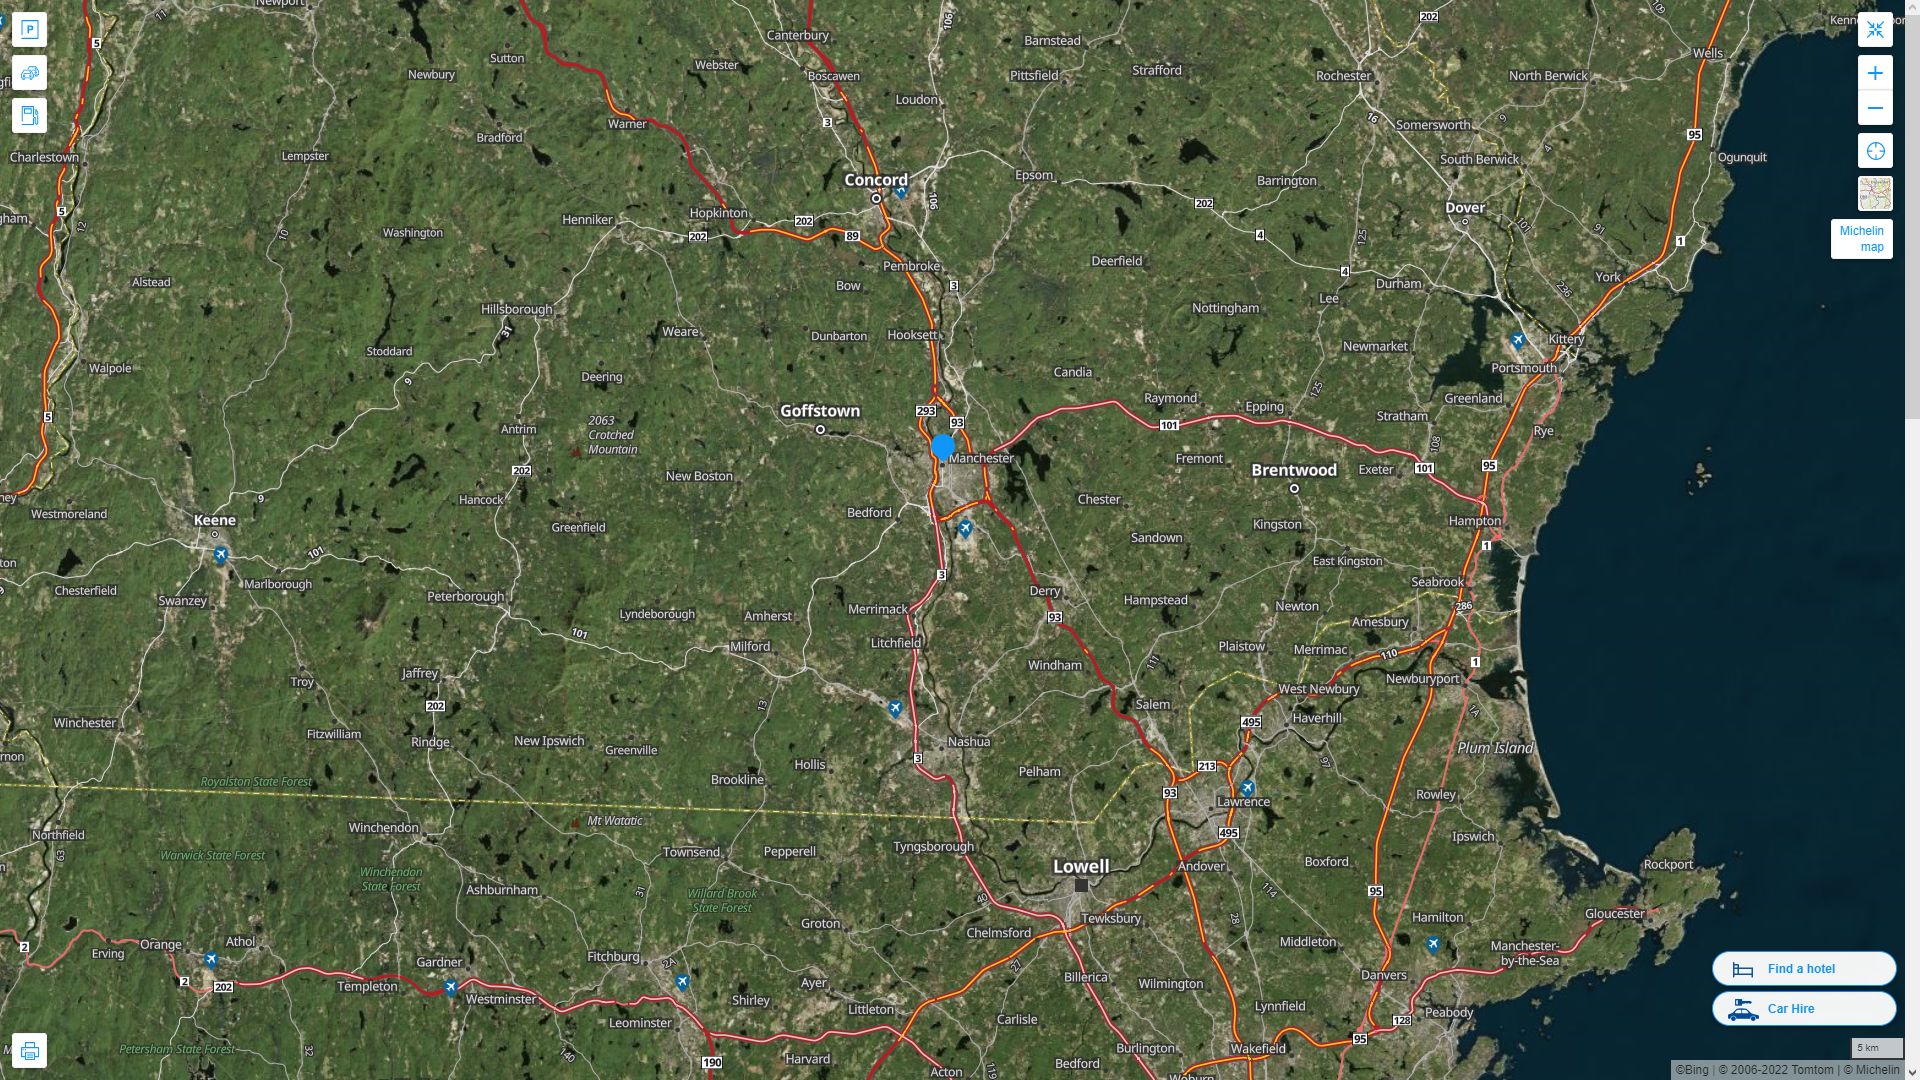 Manchester New Hampshire Highway and Road Map with Satellite View